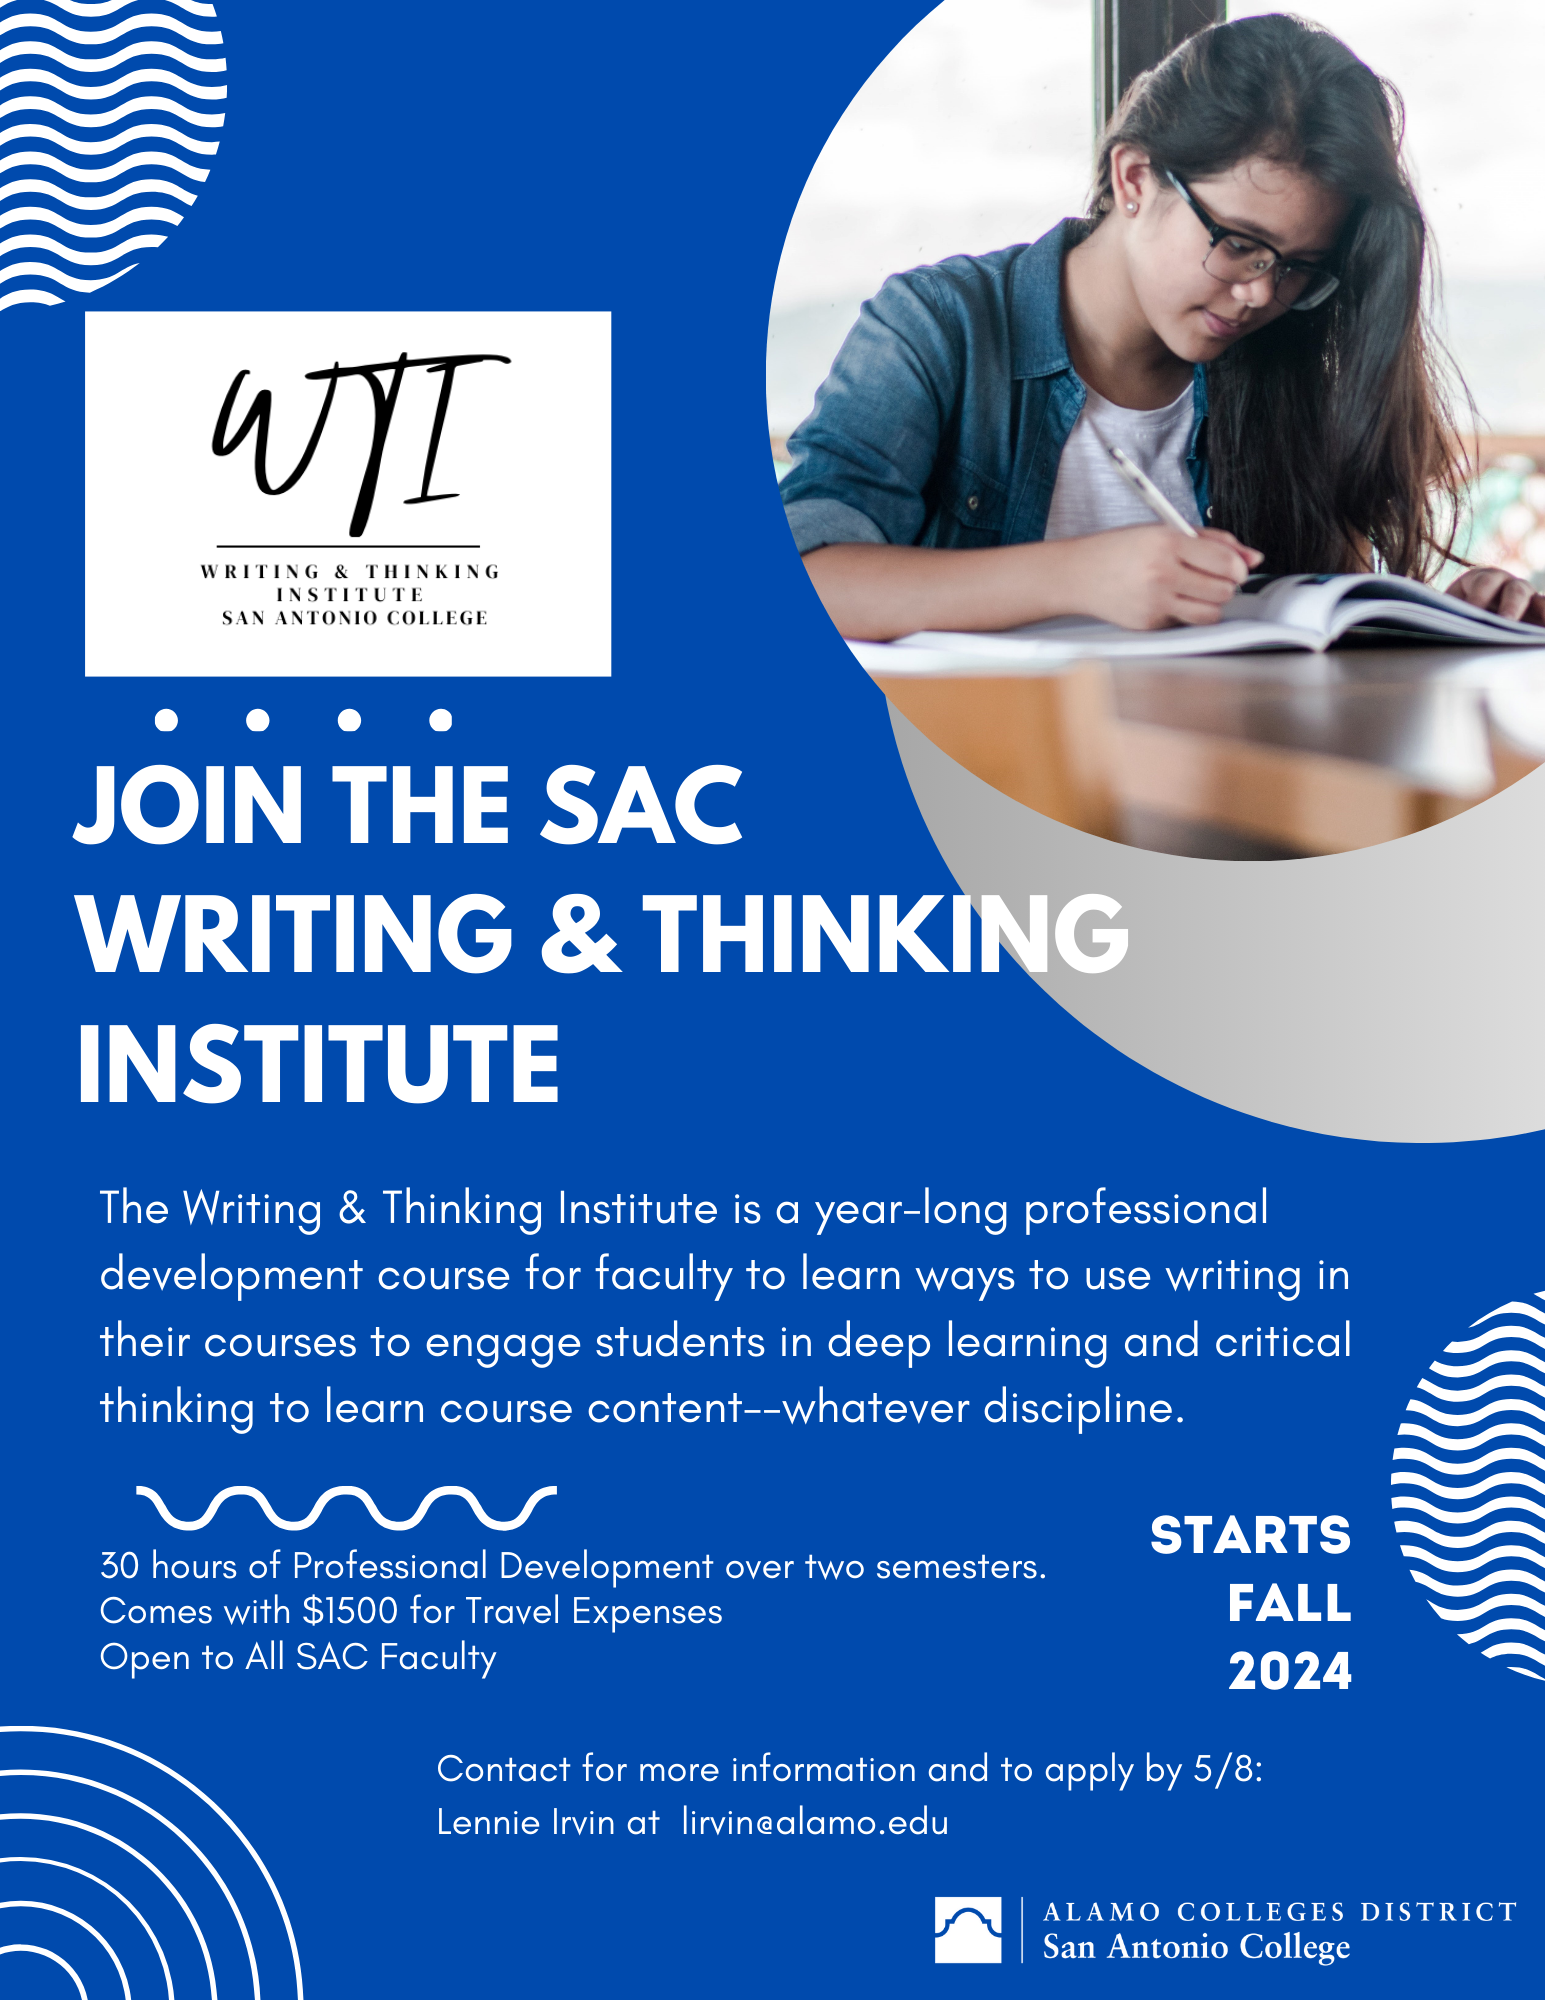 02025 Writing & Thinking Institute Conference.png